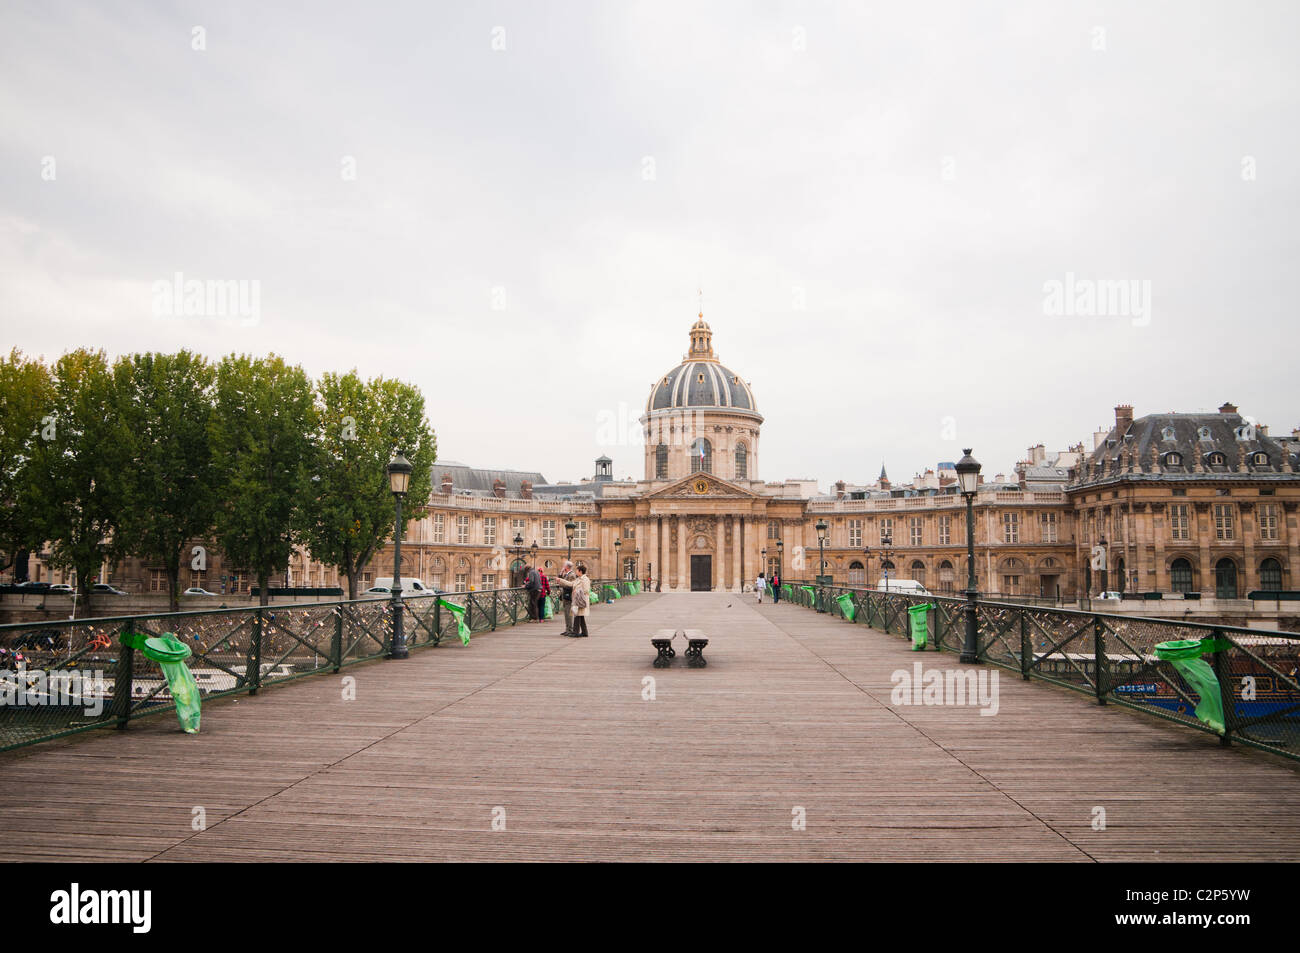 'Le pont des Arts' with the French Institute in the background - Paris, France Stock Photo